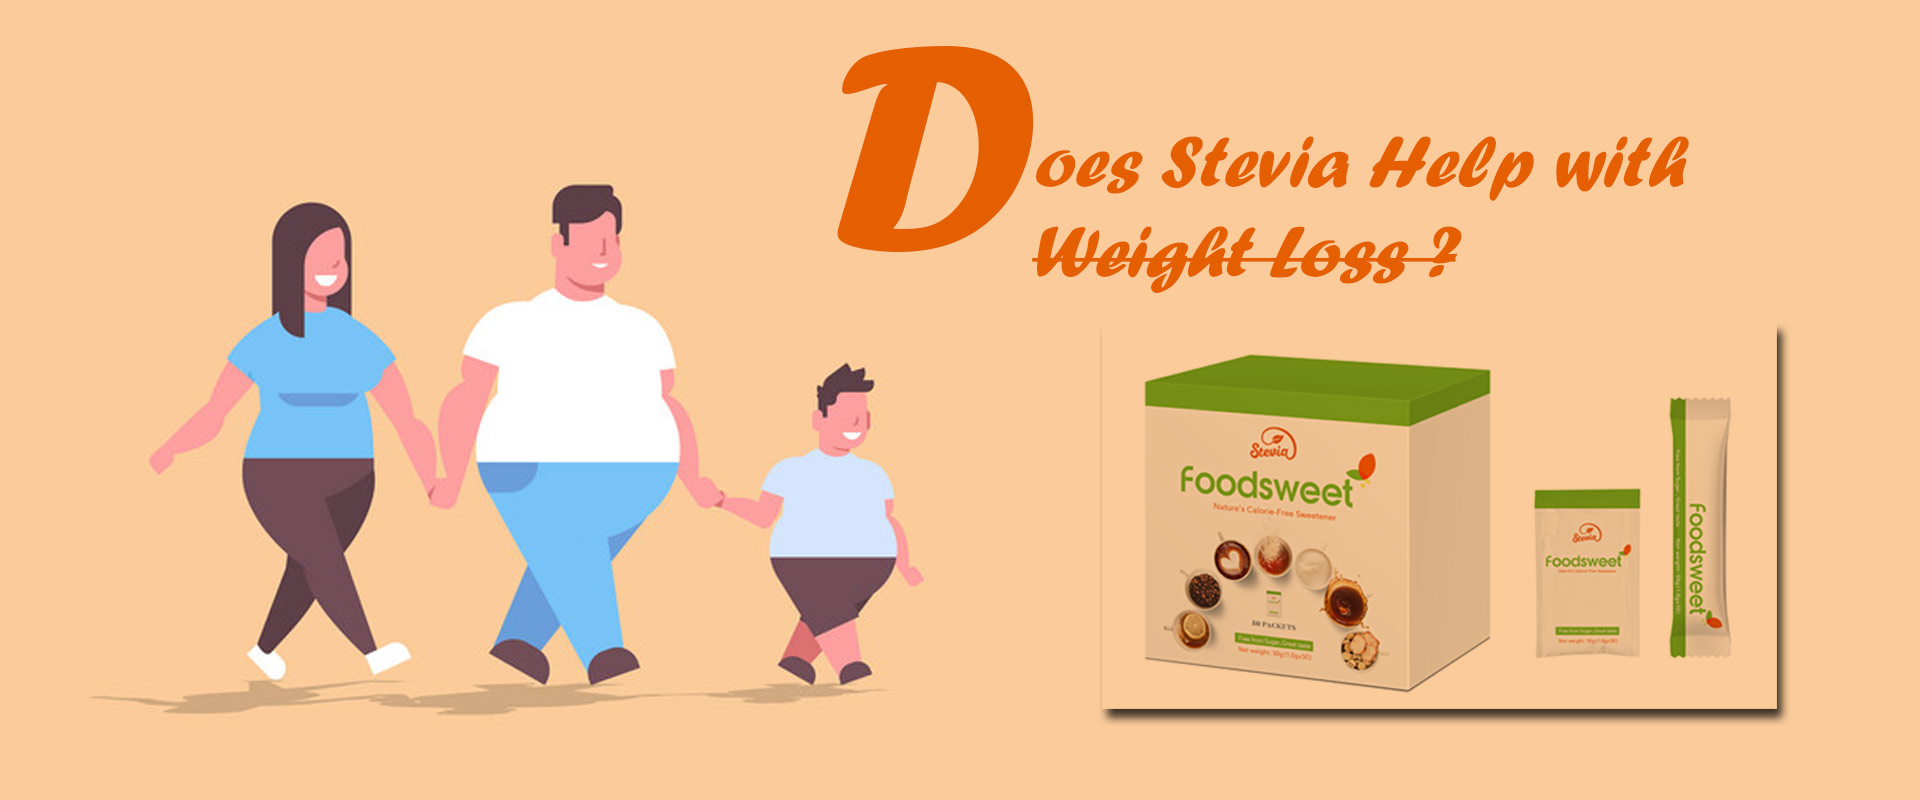 Stevia Help with Weight Loss - Foodchem